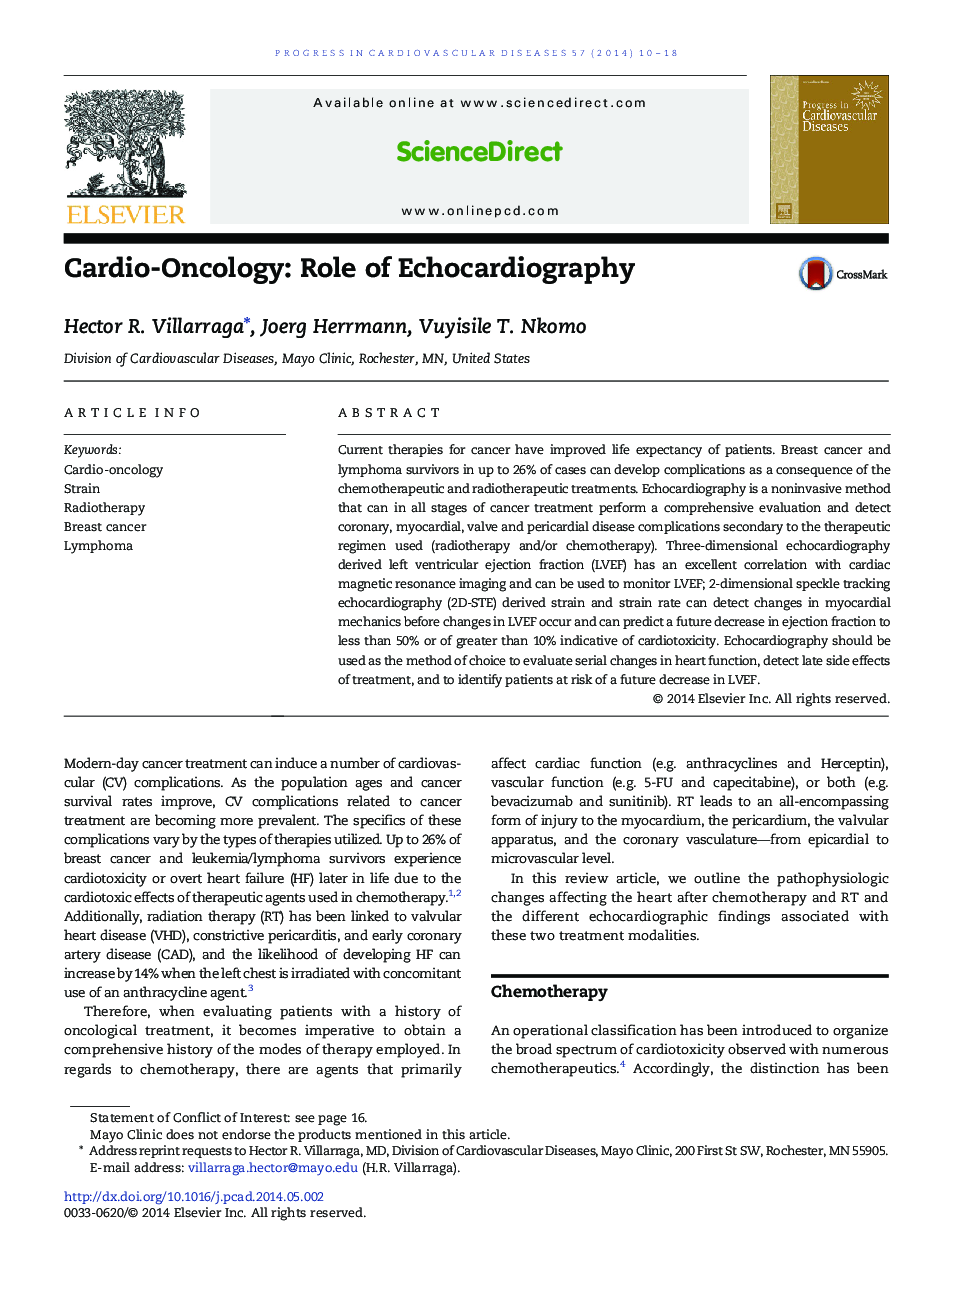 Cardio-Oncology: Role of Echocardiography 